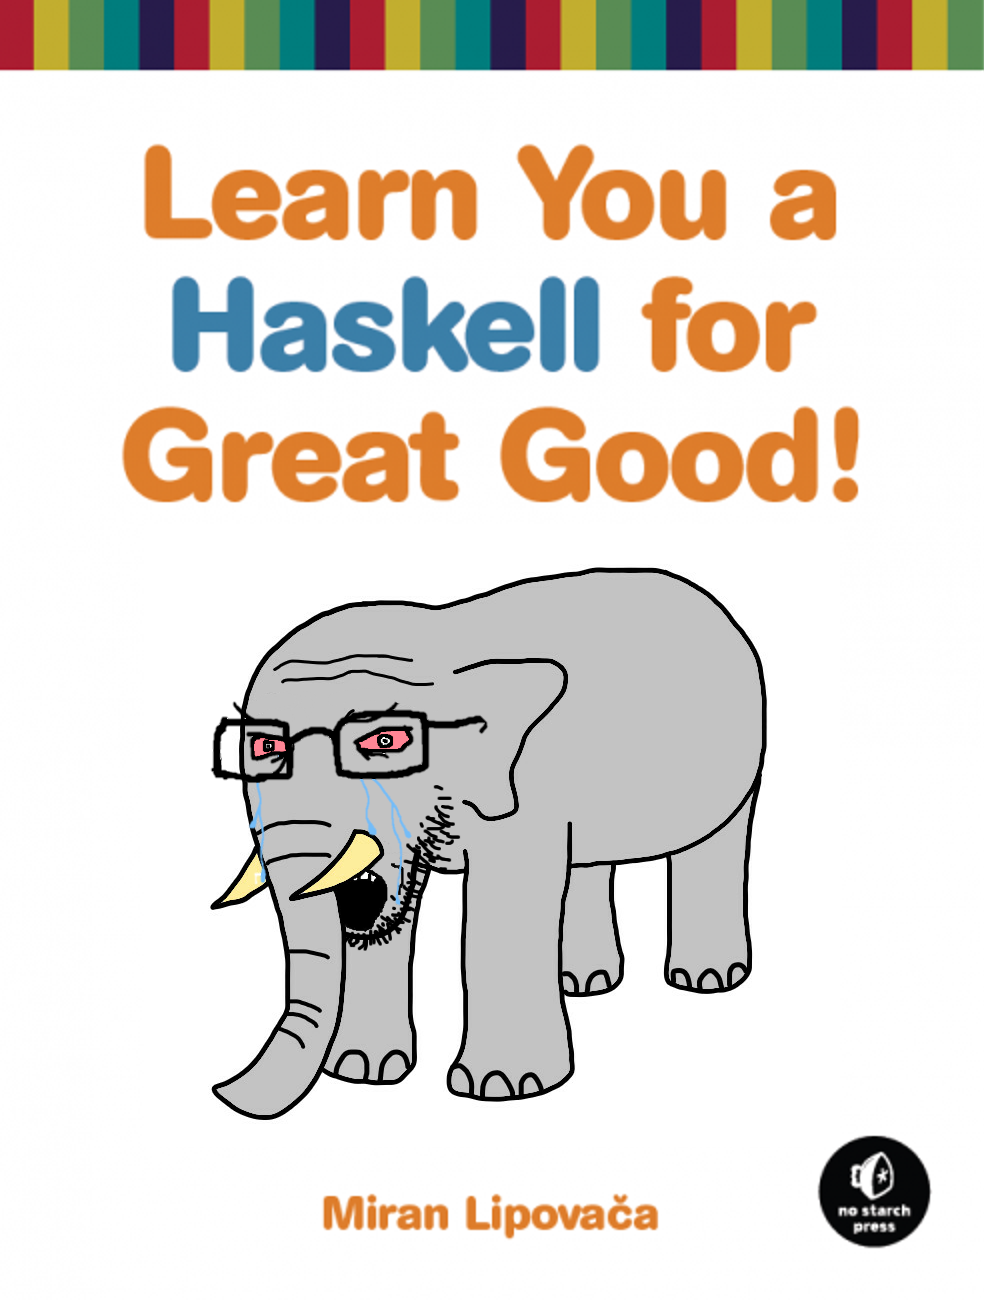 Learn Haskell for greater good